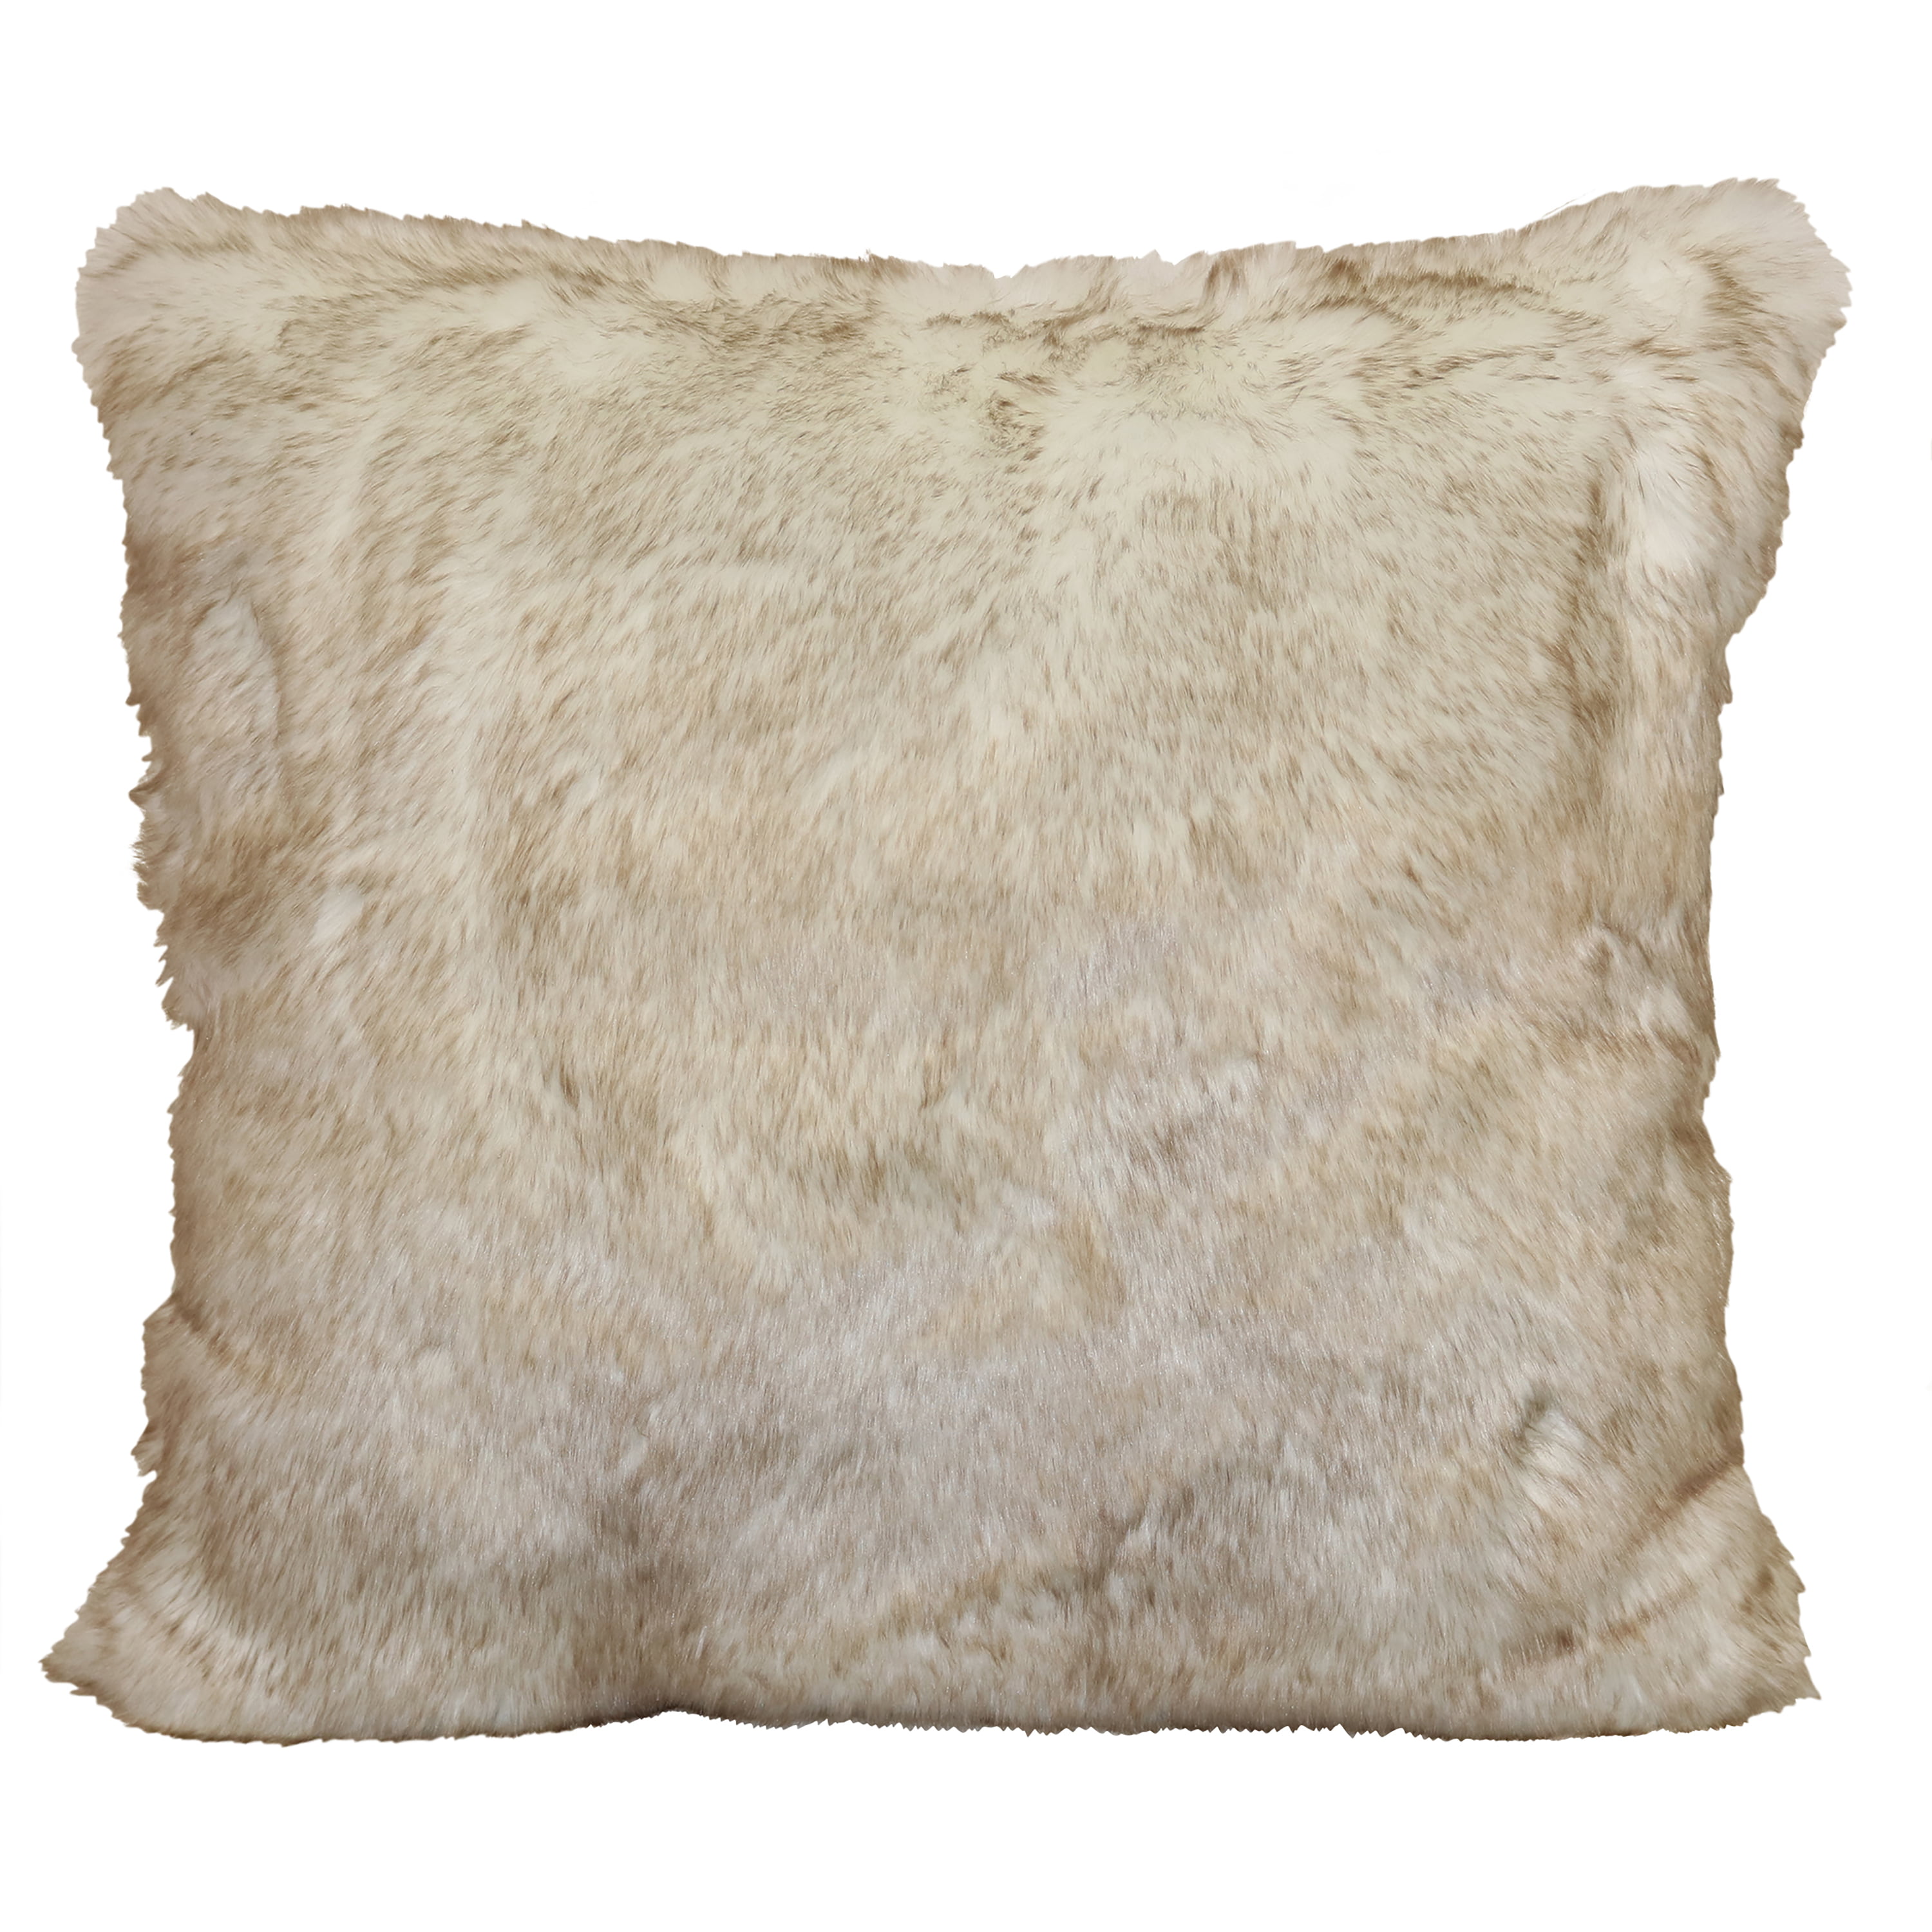 Ideal for The Living Room or Bedroom 18 x 18 x 3 Plush Texture Christopher Knight Home 299710 Ellison Dark Brown Decorative Faux Fur Fabric Throw Pillow